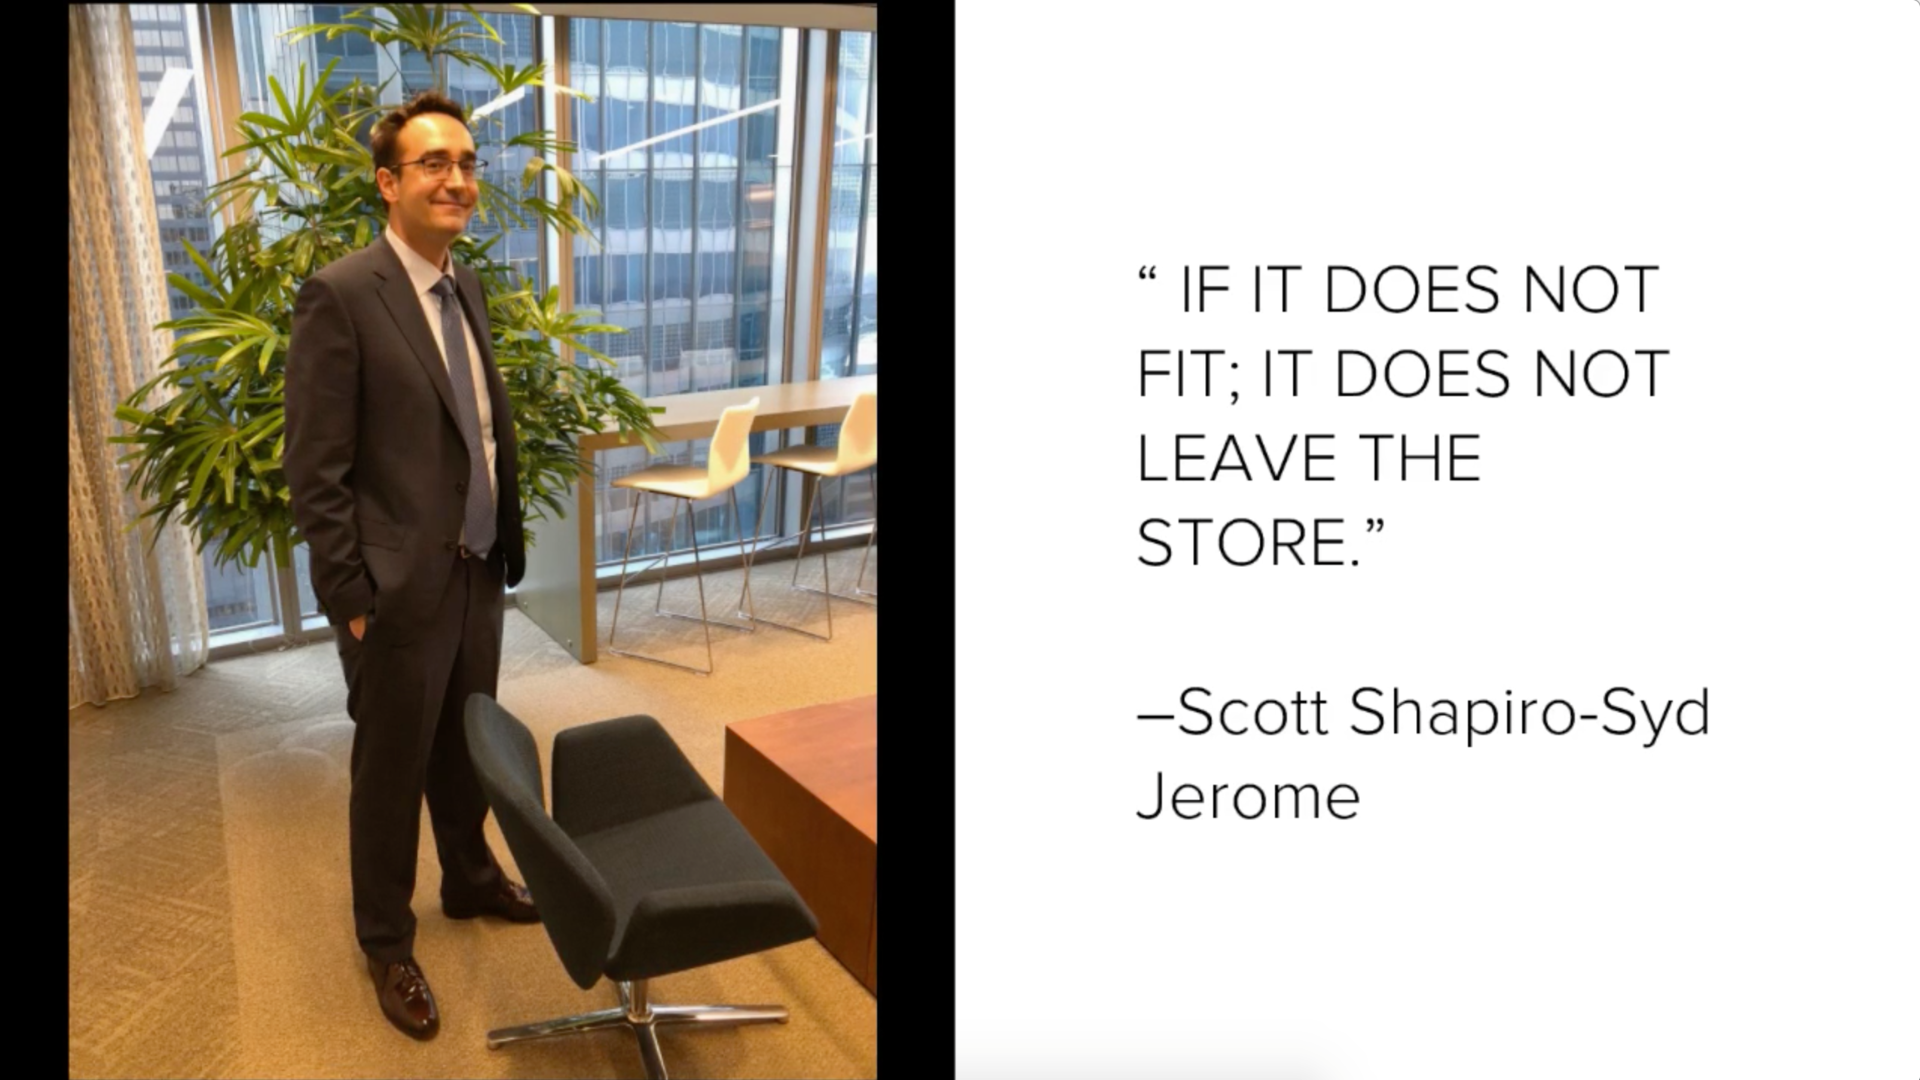 Photo of Mike Bornhorst in a well tailored suit. Quote "If it does not fit, it does not leave the store. - Scott Shapiro-Syd Jerome